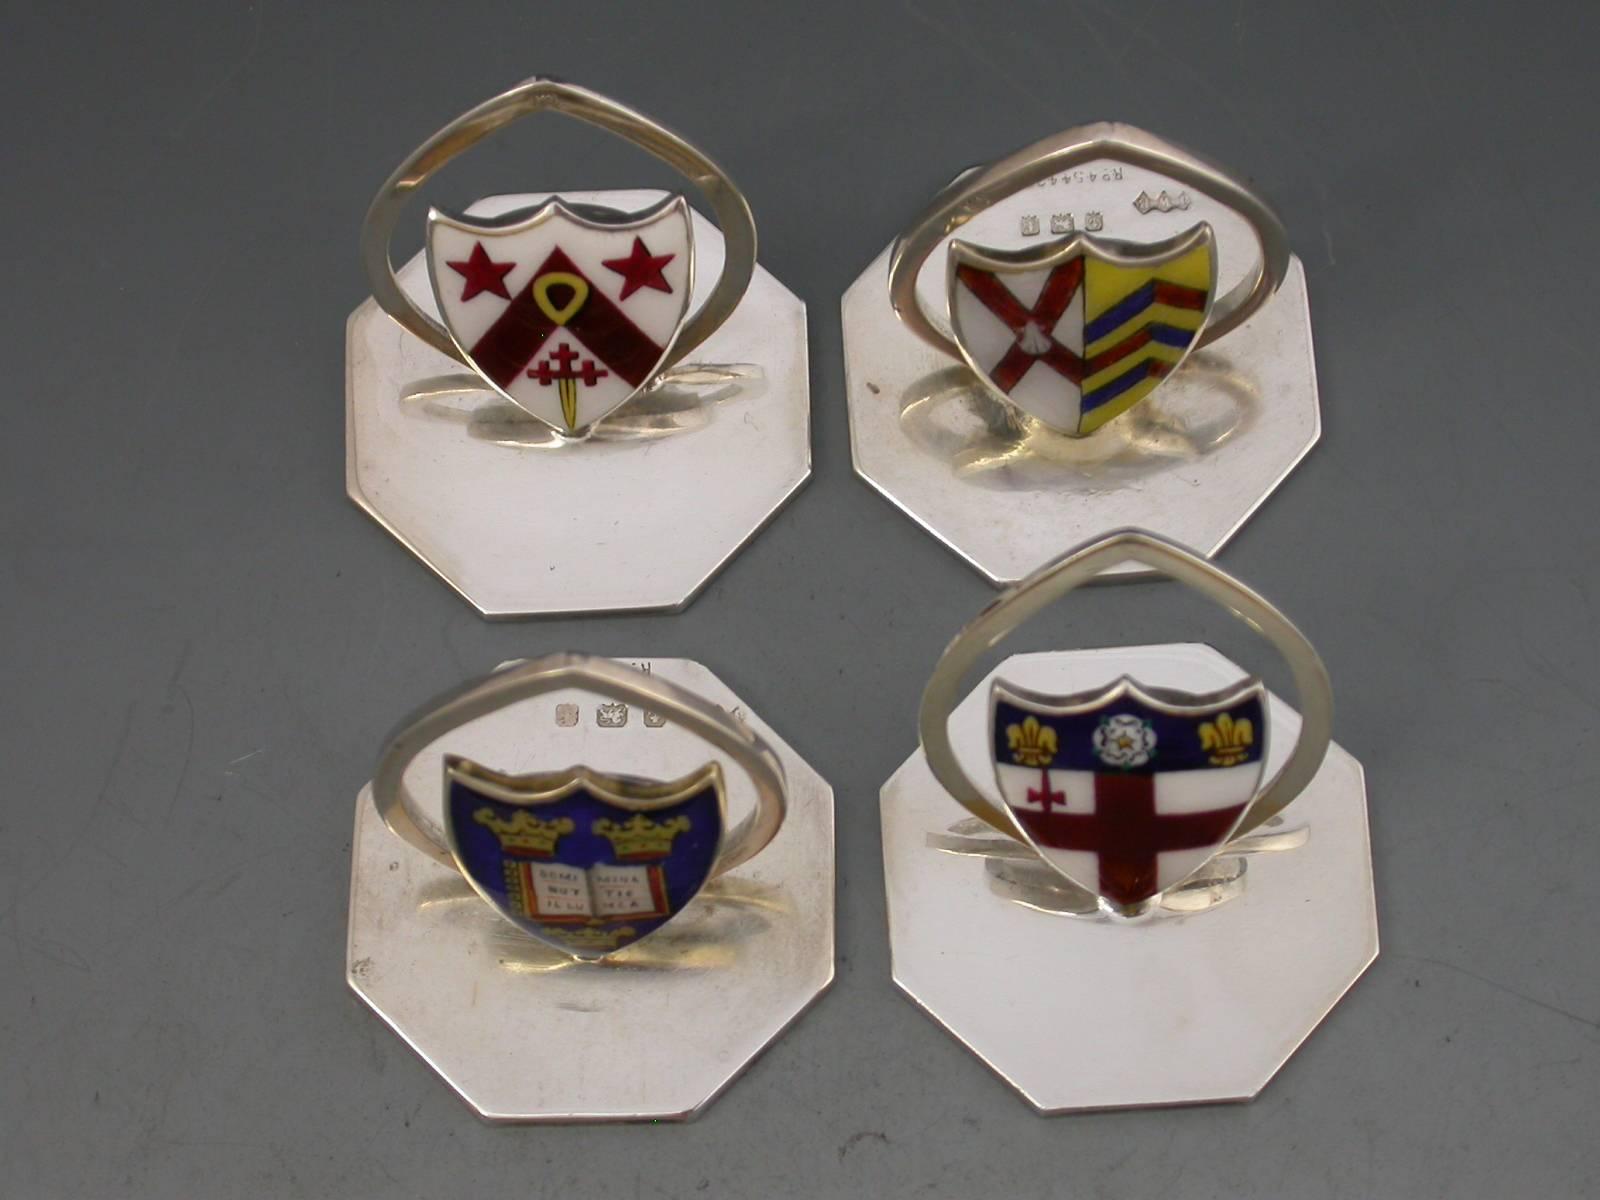 A composed set of four or two pairs of early 20th century silver and enamel Oxford University menu holders, the shield shaped stands on octagonal bases enameled with the Coats of Arms of Oxford University and Merton College, plus two